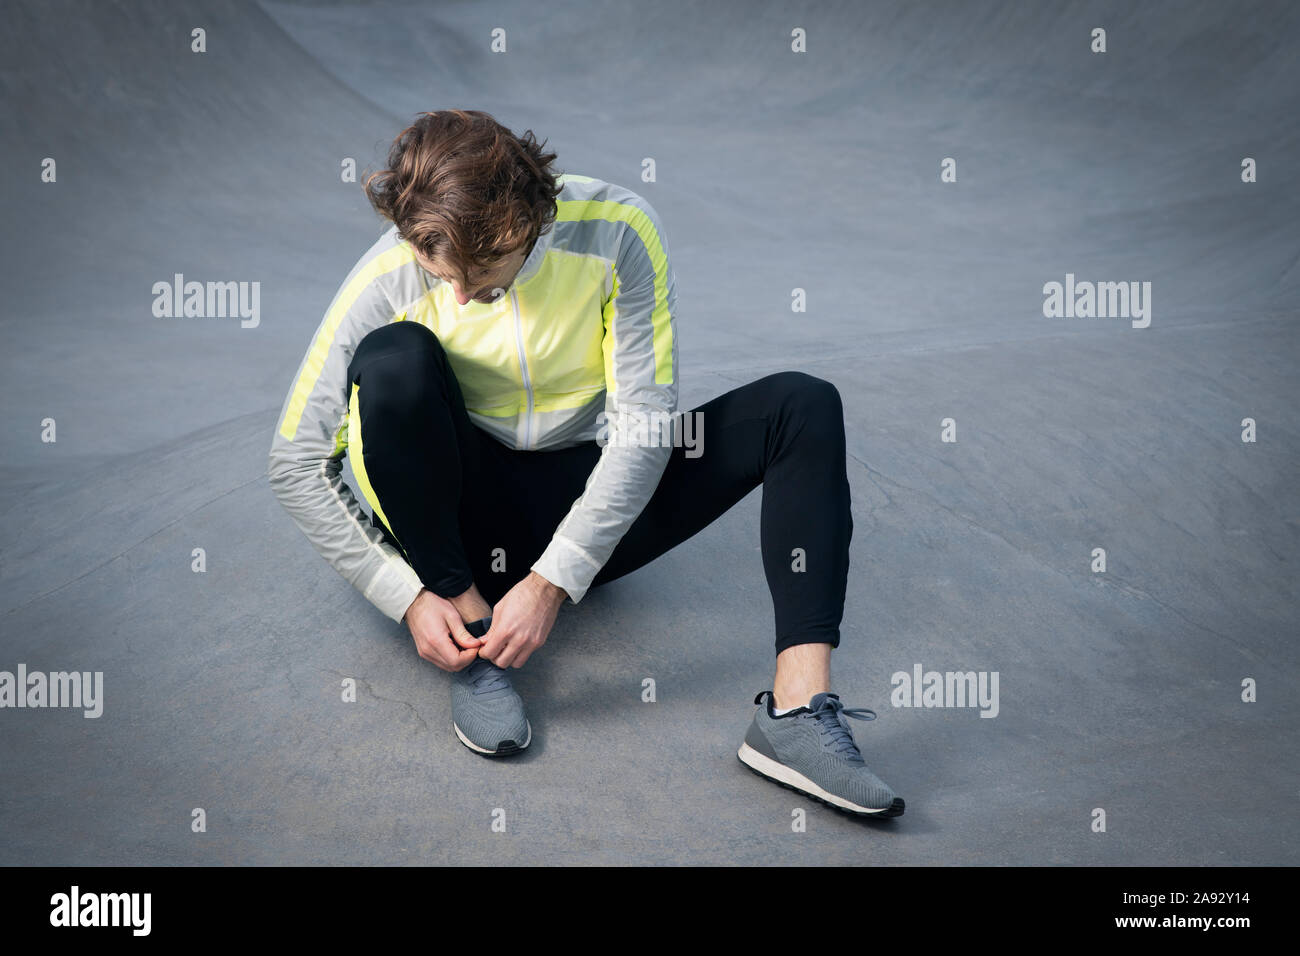 Man in sport clothes tying shoe Stock Photo